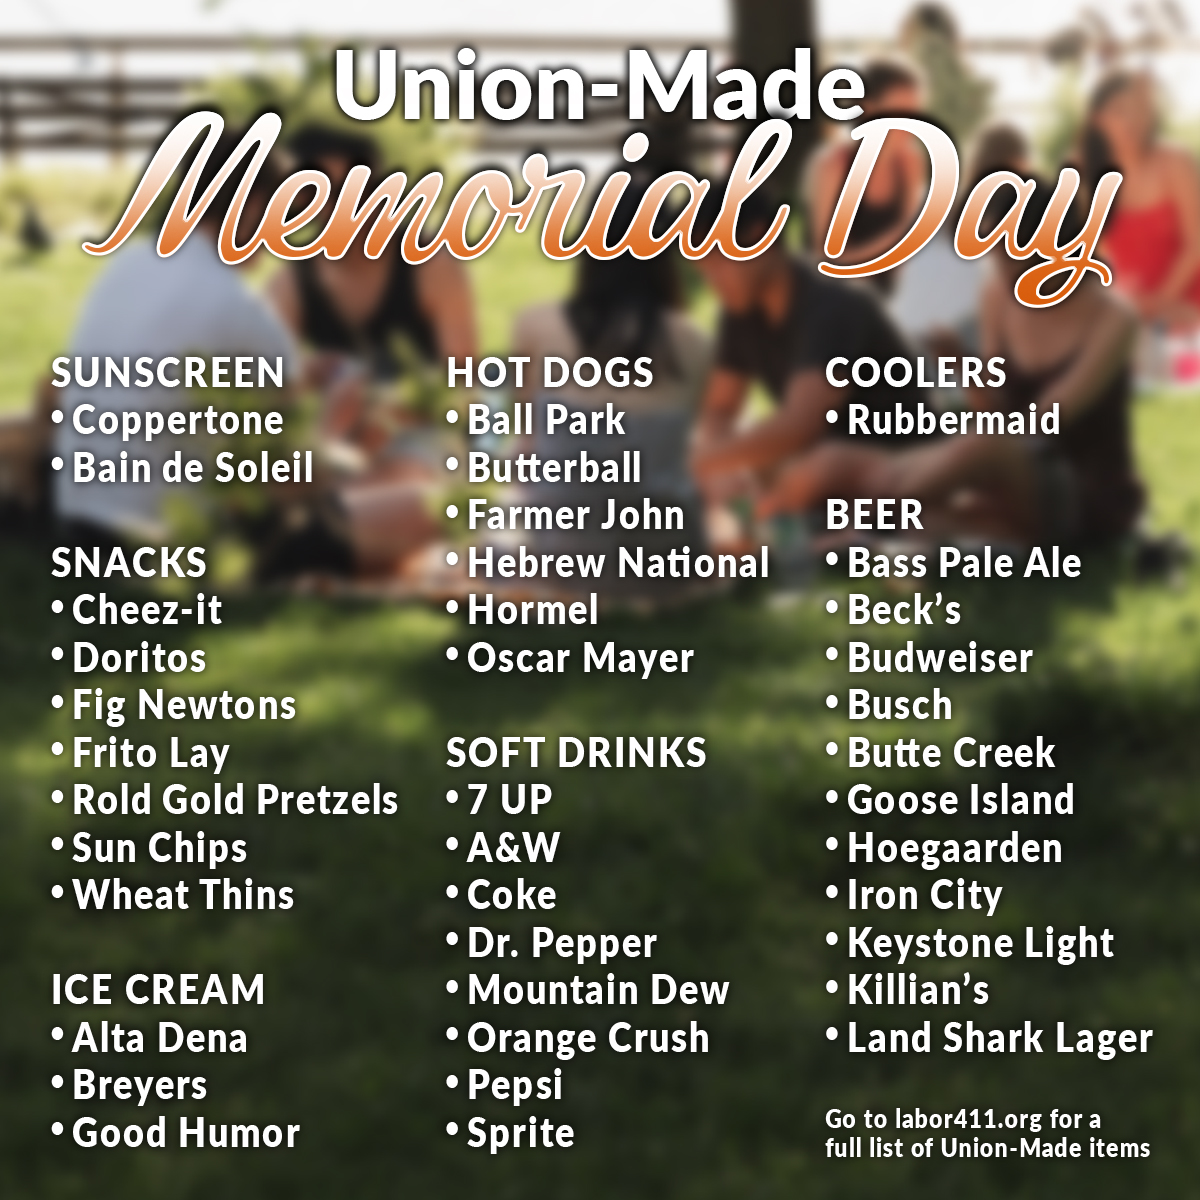 Memorial Day weekend is almost here! Make sure you're well supplied with these great #UnionMade products & always remember to drink responsibly. #UnionProud #UnionStrong #MemorialDayWeekend #MDW24 #MemorialDay #Picnic #Party #Beer #Snacks #Outdoor #Park #Labor411